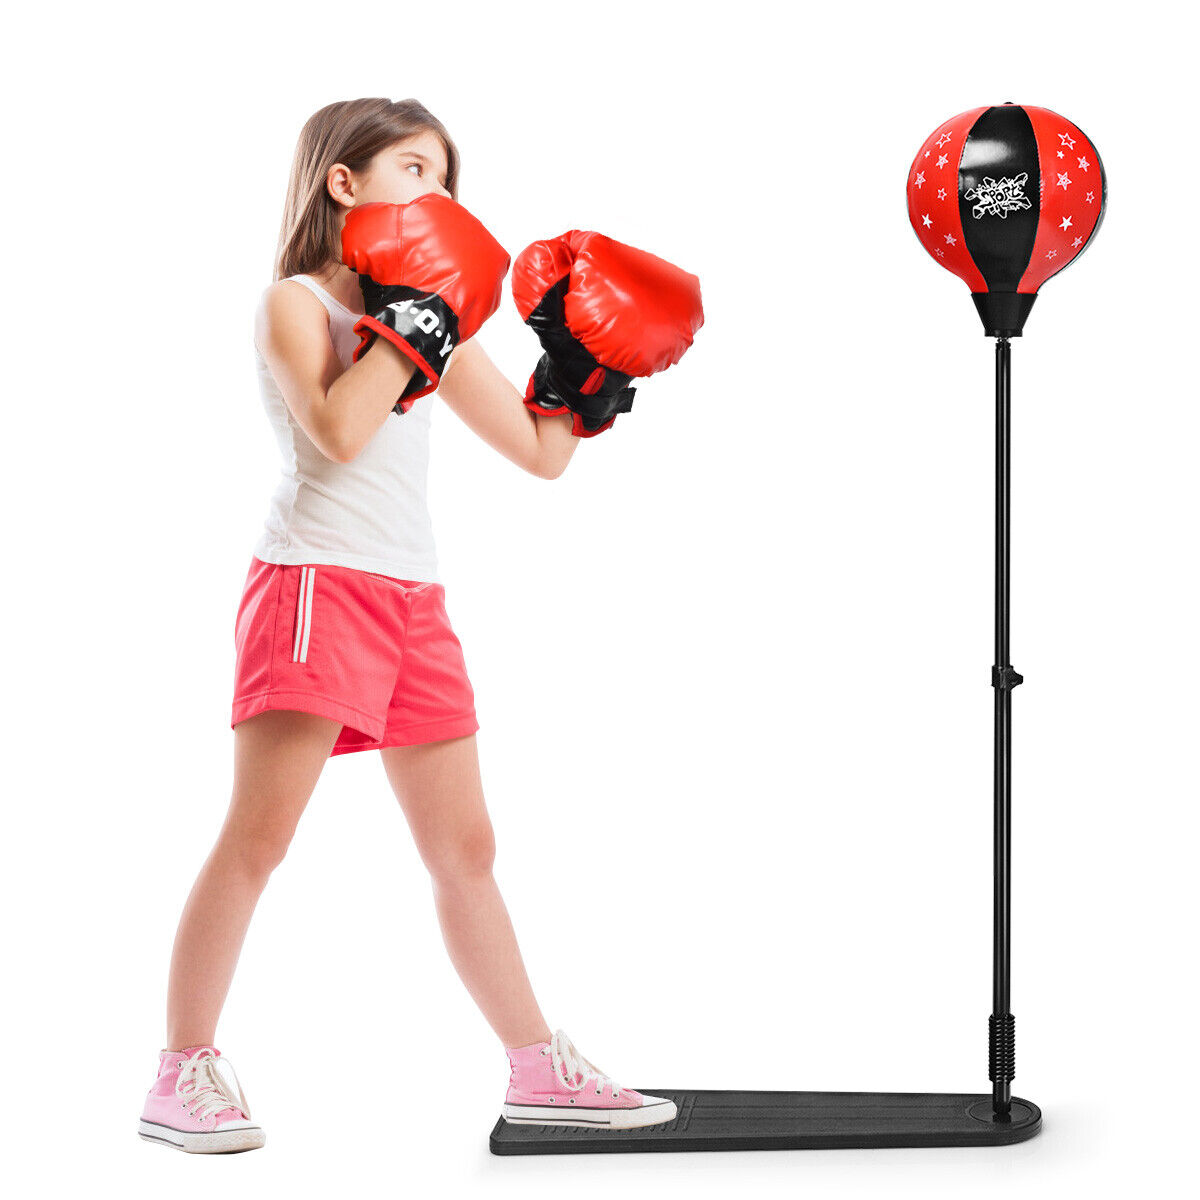 Kids Punching Bag With Adjustable Stand and Boxing Gloves for sale online eBay